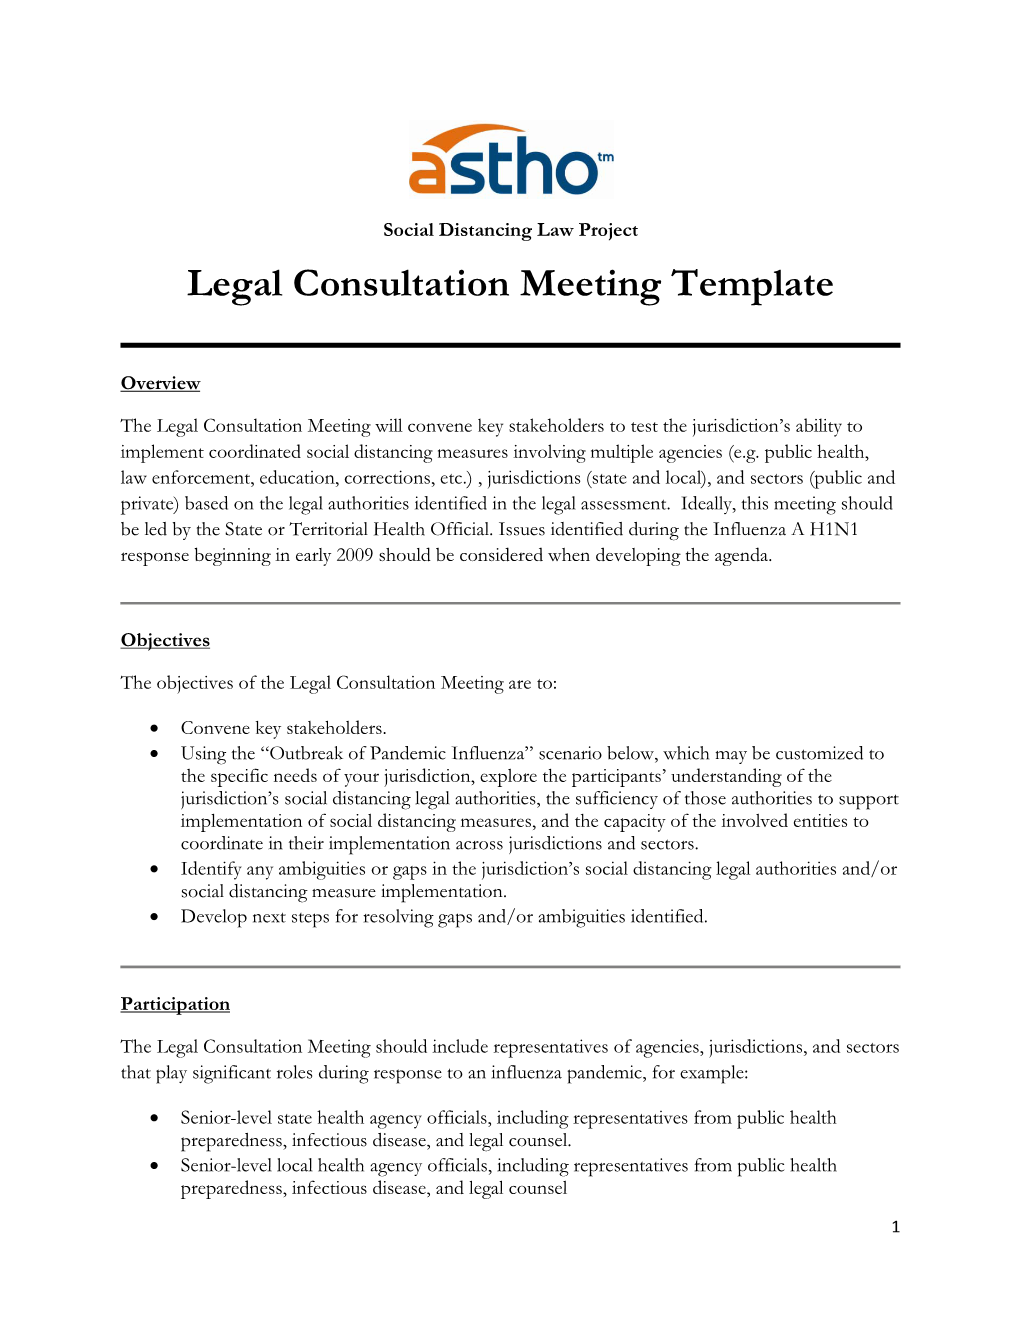 Legal Consultation Meeting Template